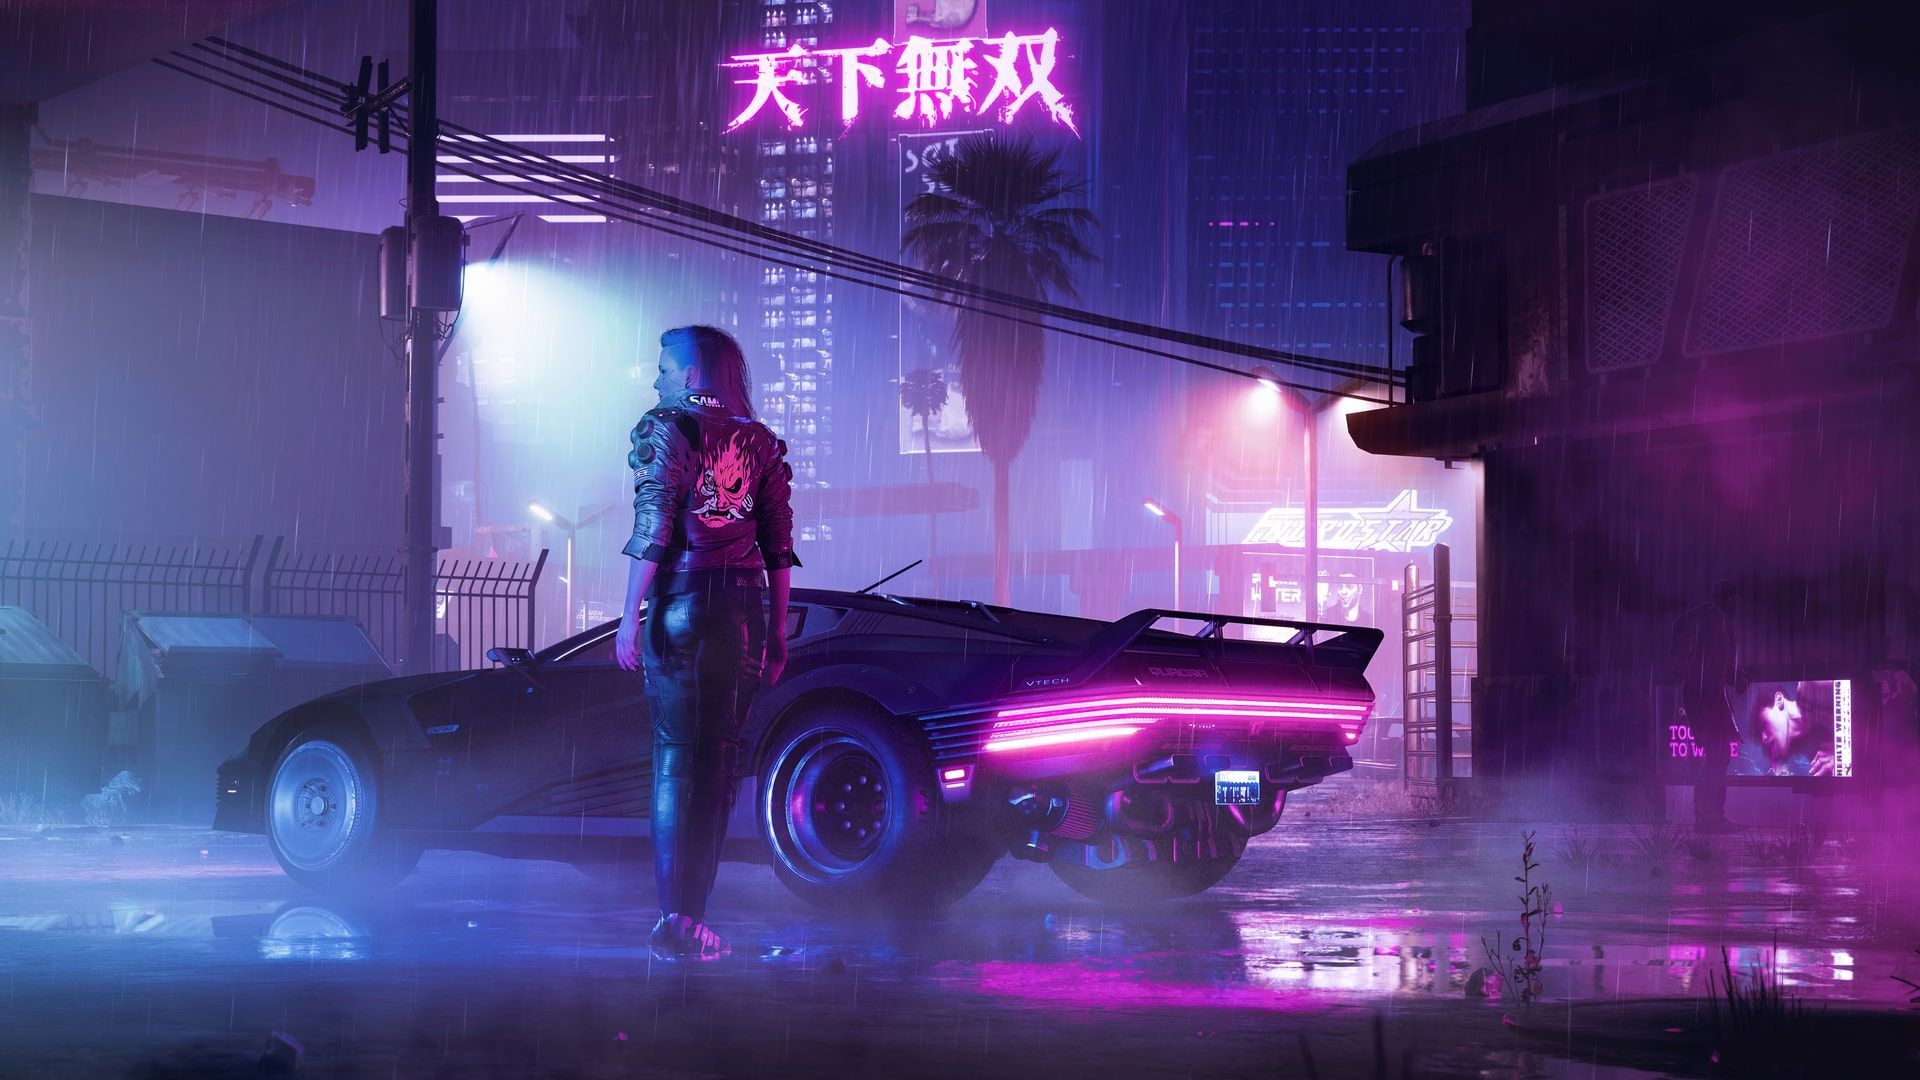 A man stands in front of an old car with neon lights - Cyberpunk, anime city